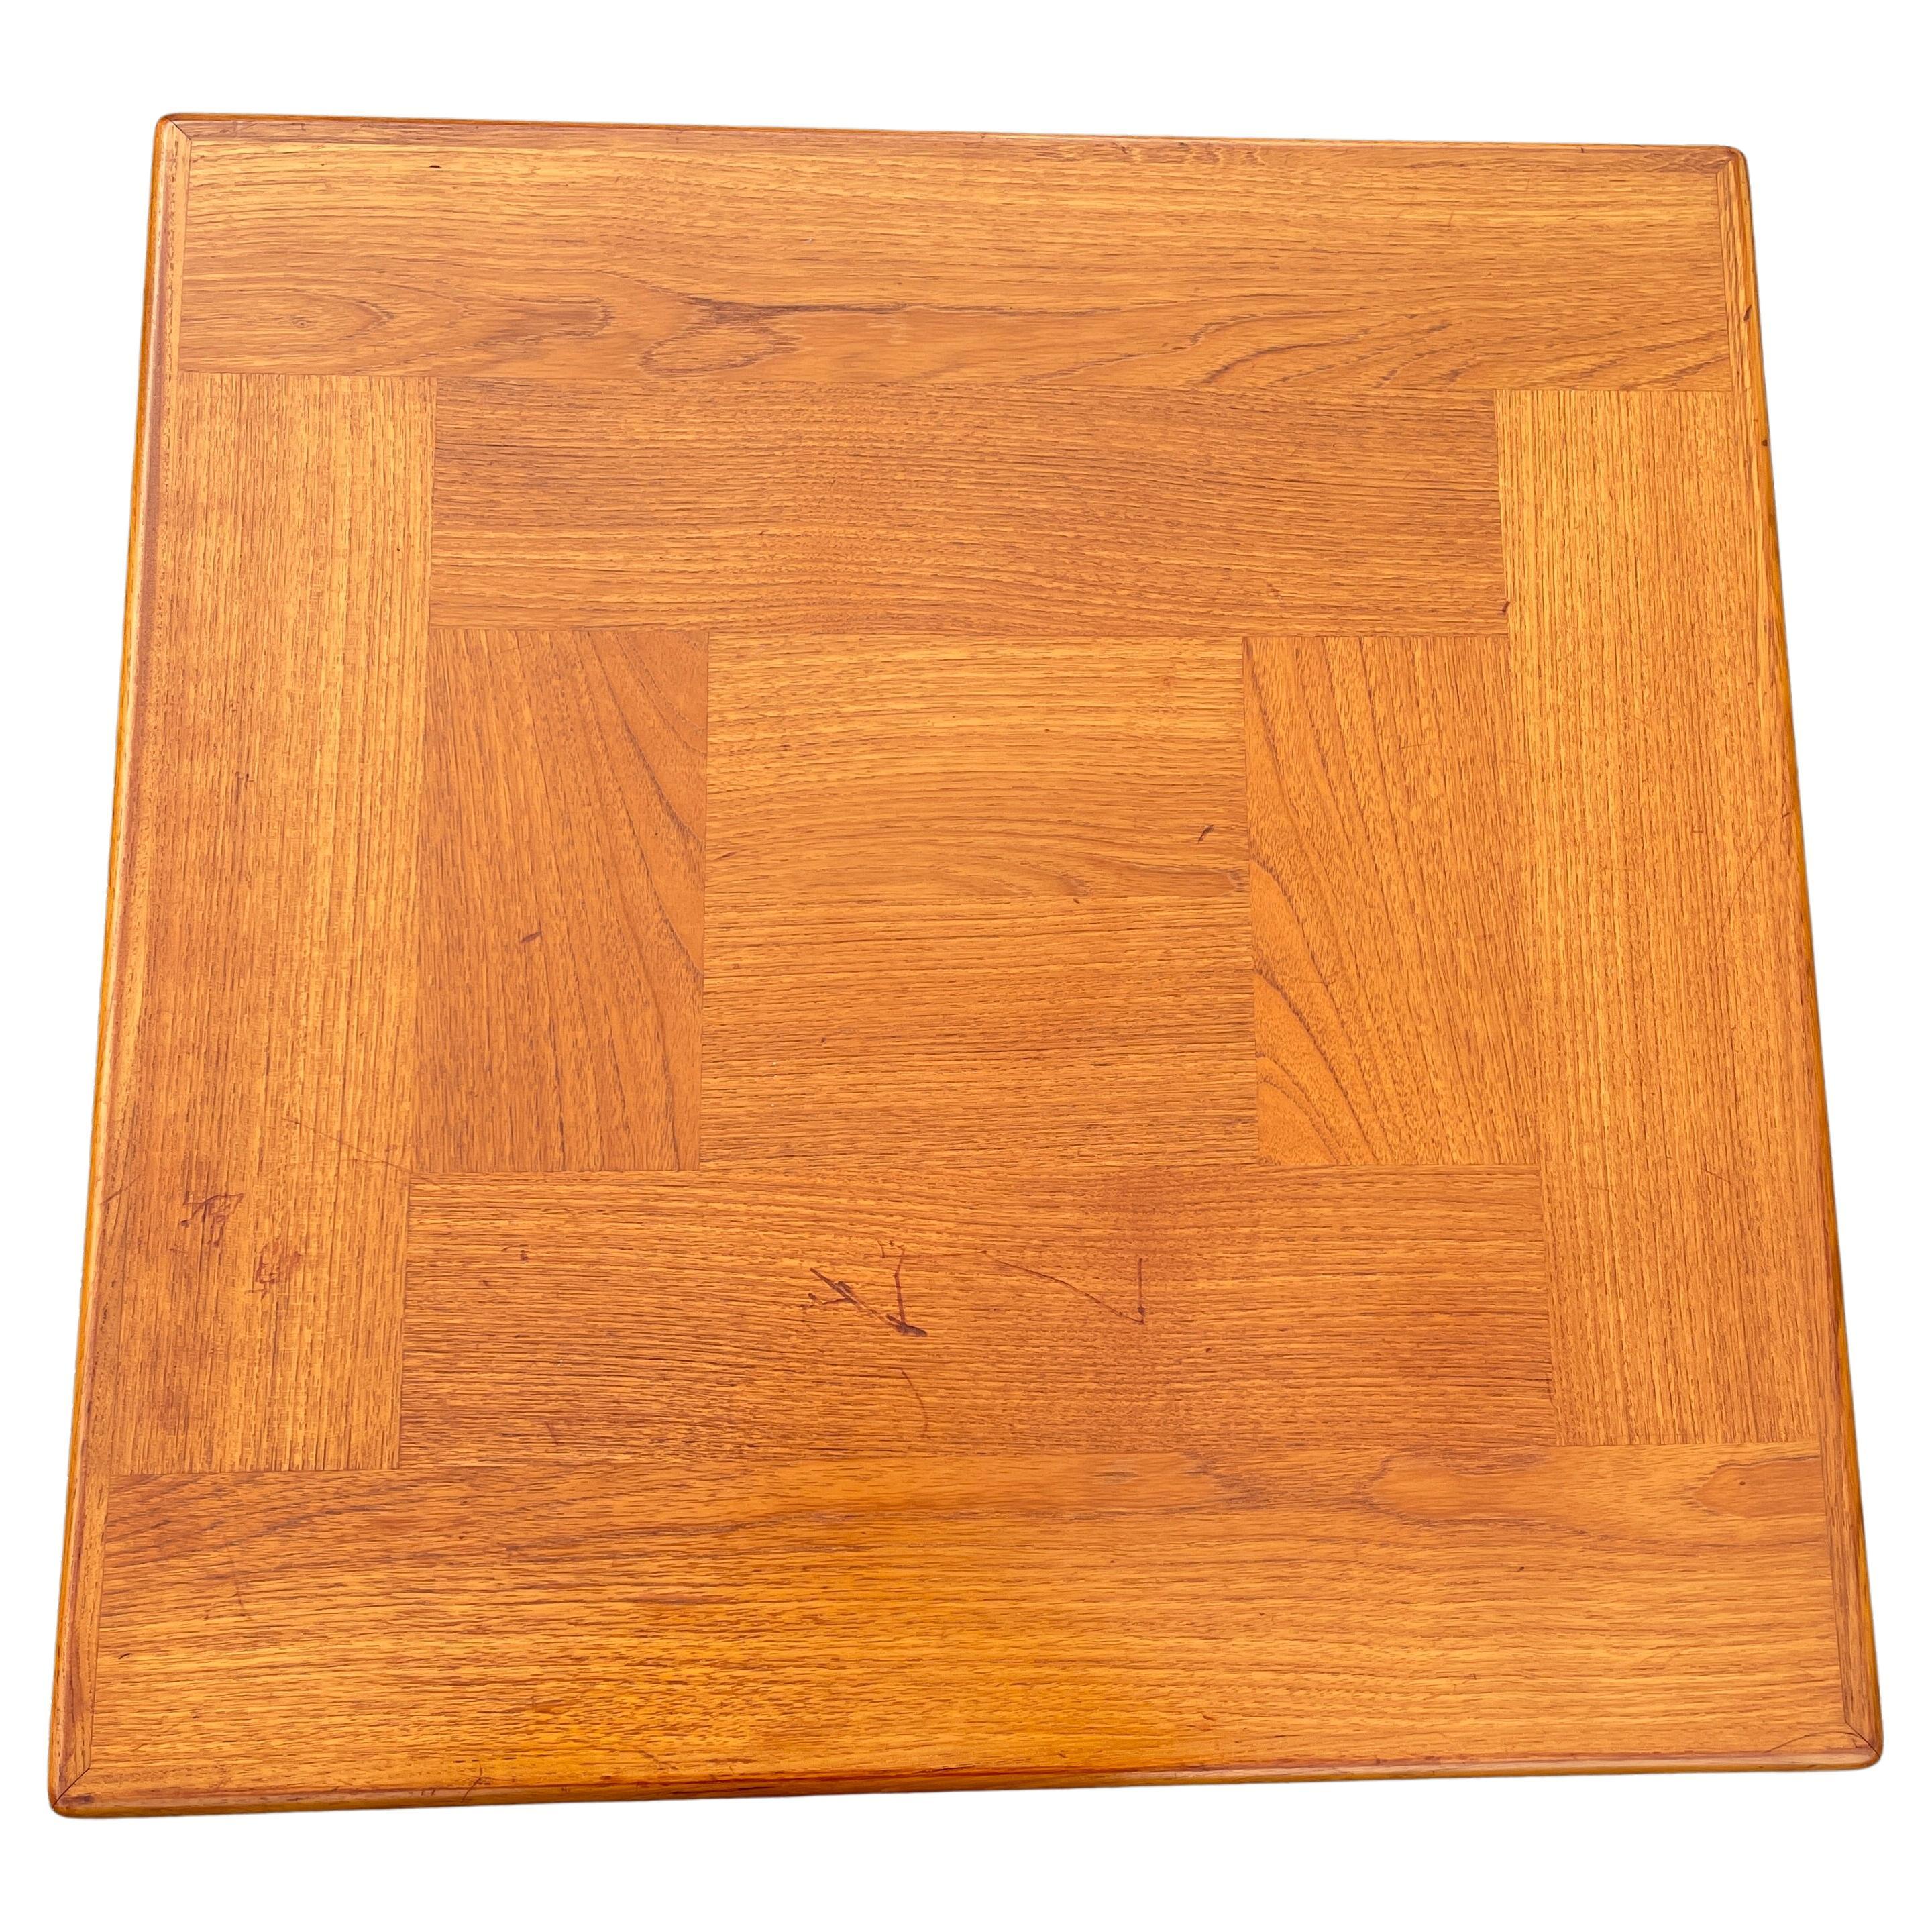 Scandinavian Modern square teak wood coffee table. Manufactured by 